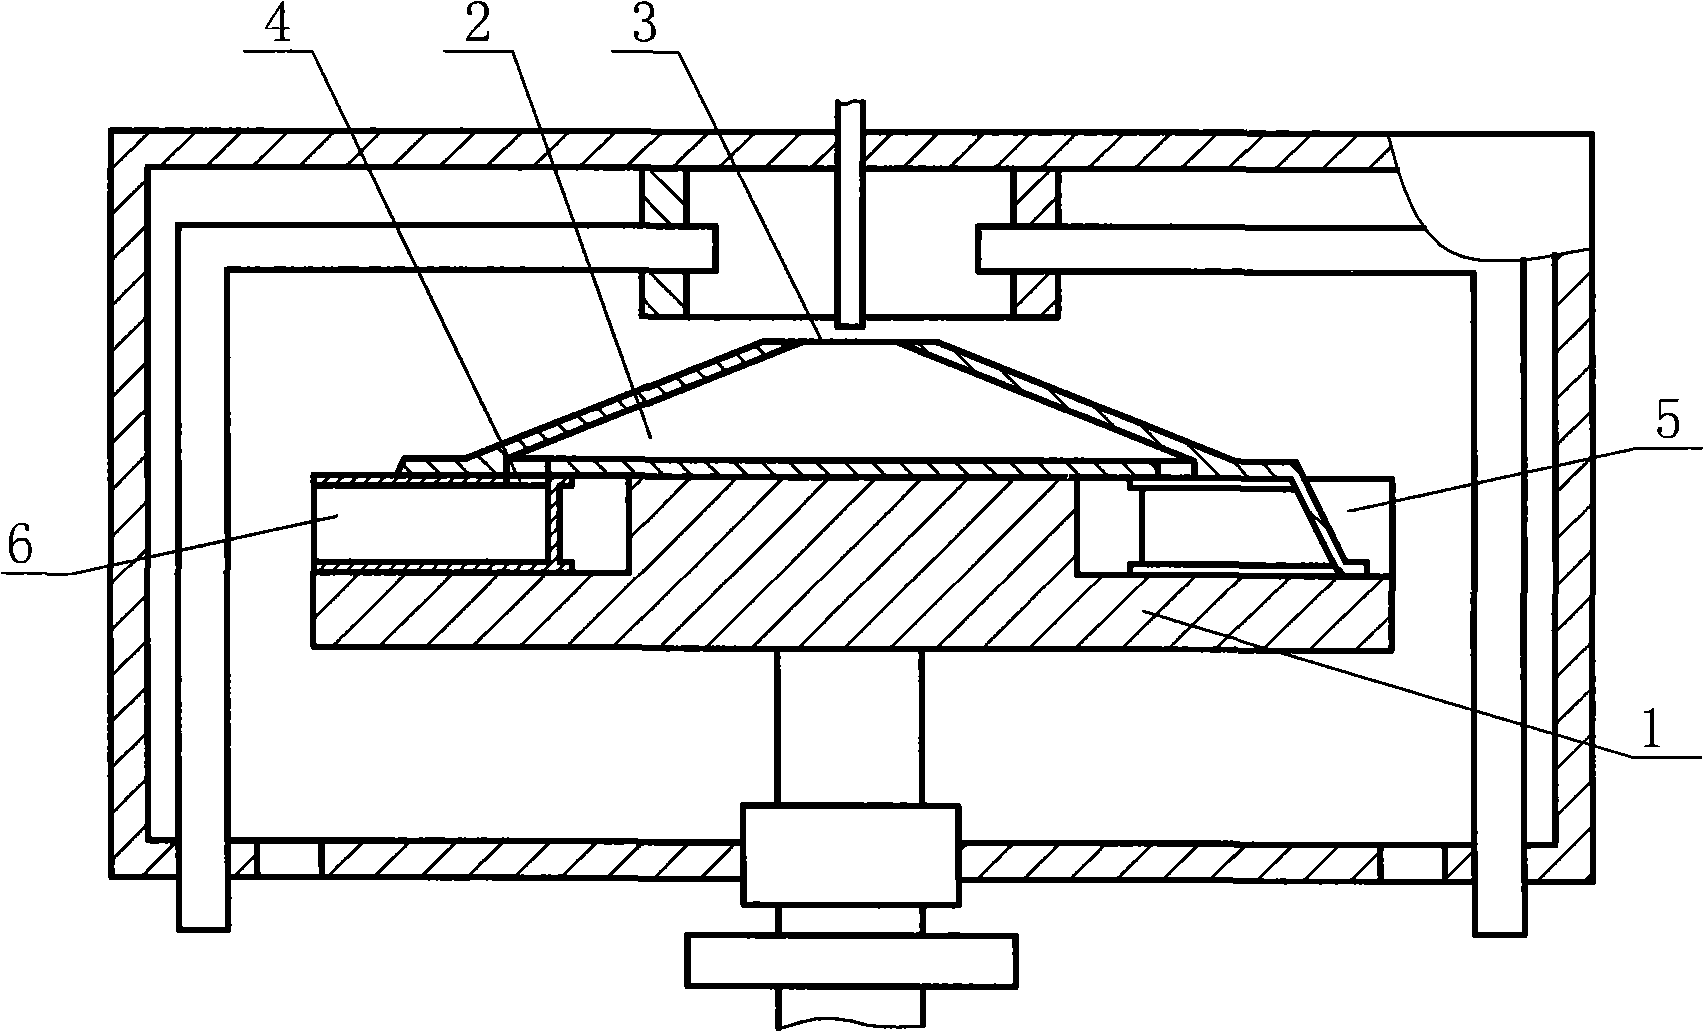 Nuclear reactor and flying disk manufactured by the same